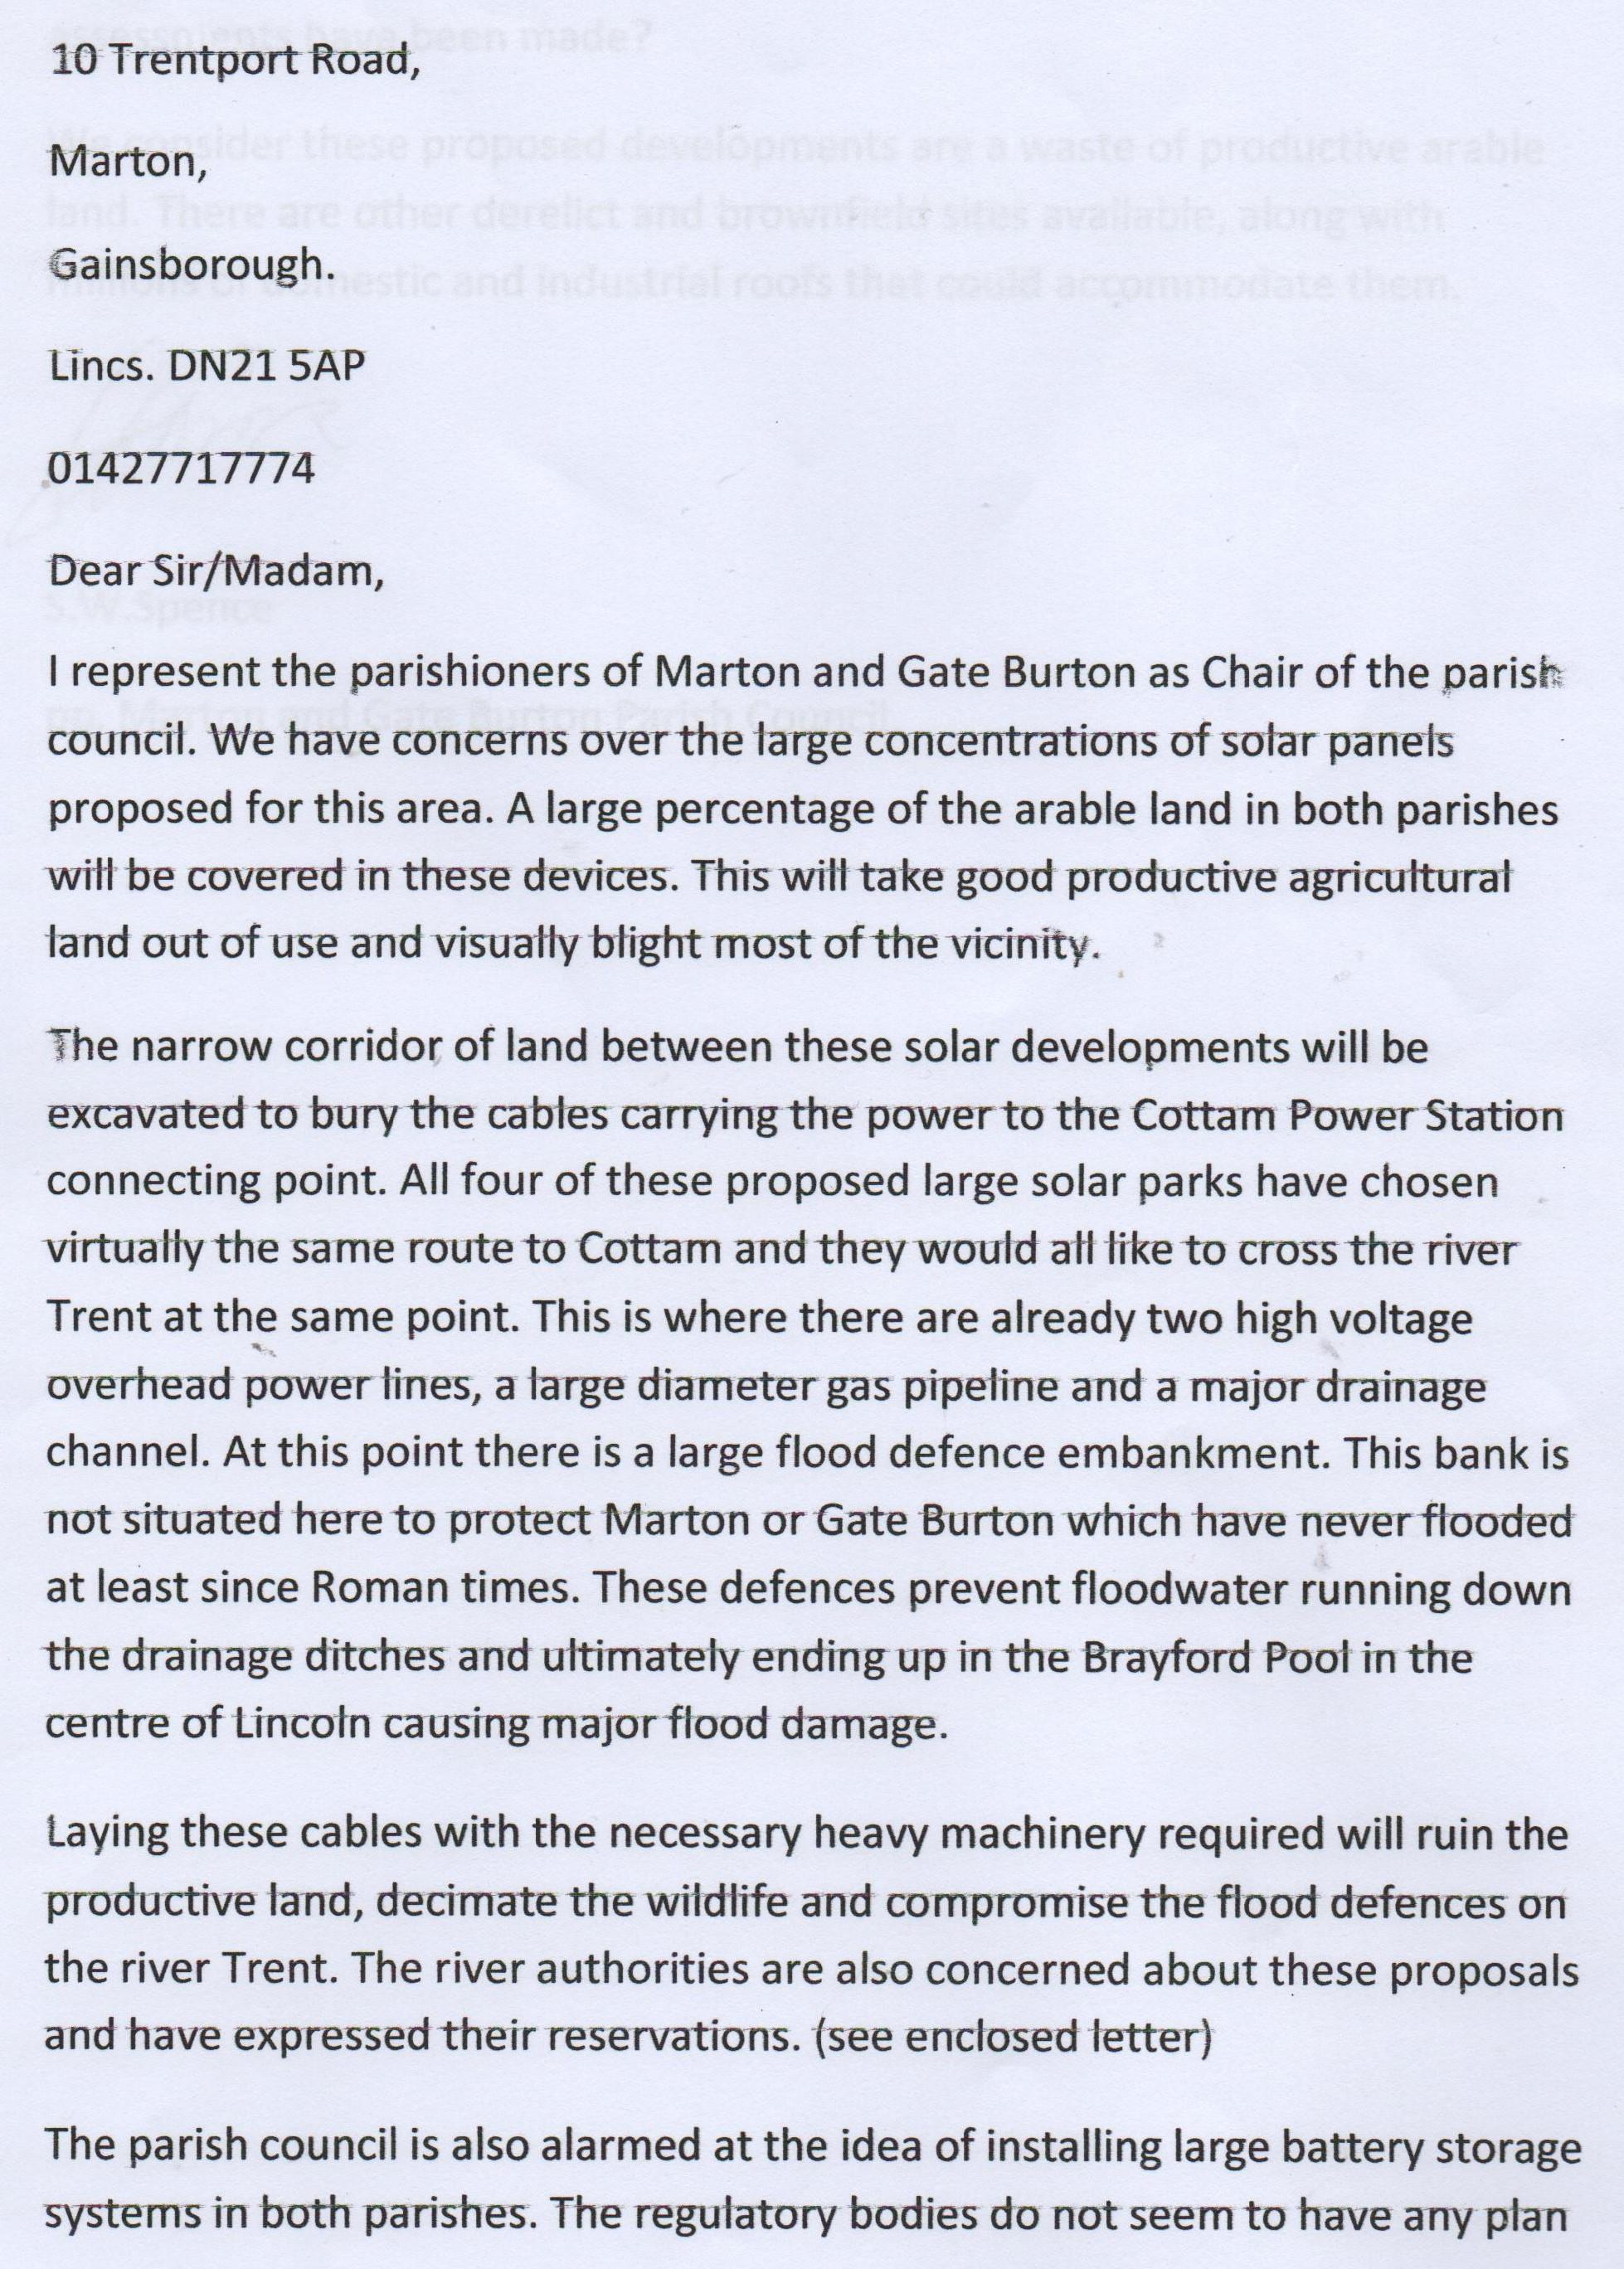 Cllr spence s comments to west burton solar hearing 001